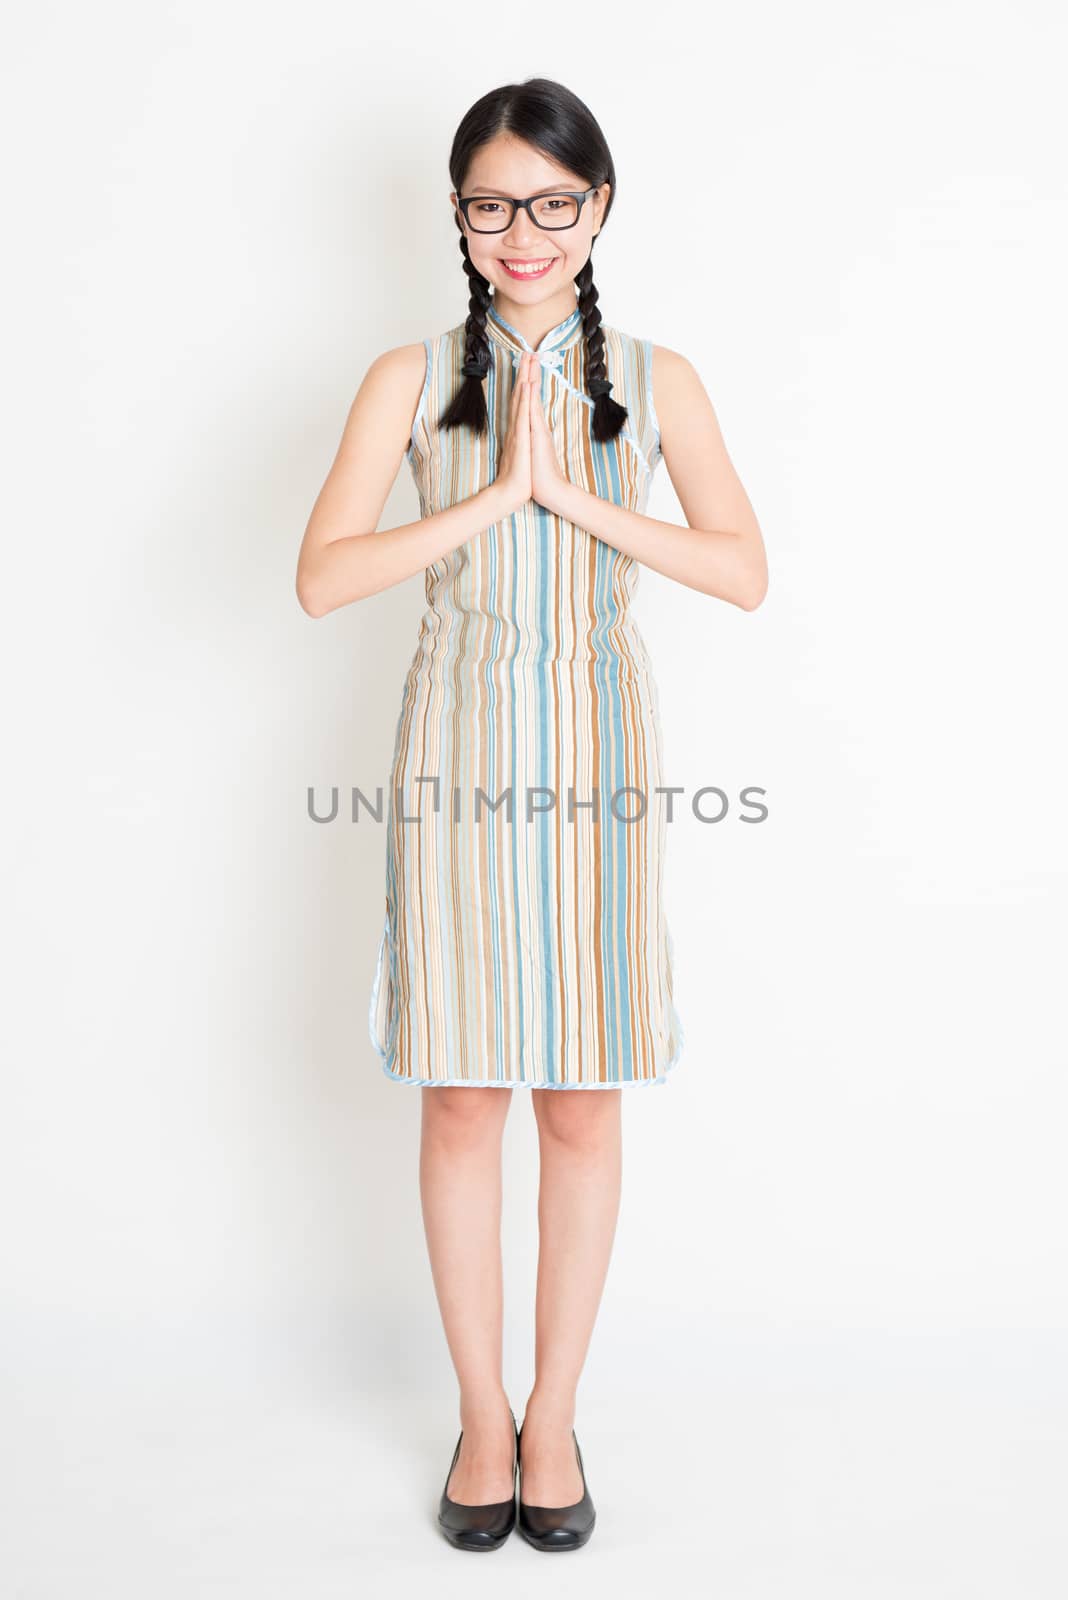 Portrait of young Asian girl in traditional qipao dress in greeting pose, full length standing on plain background.